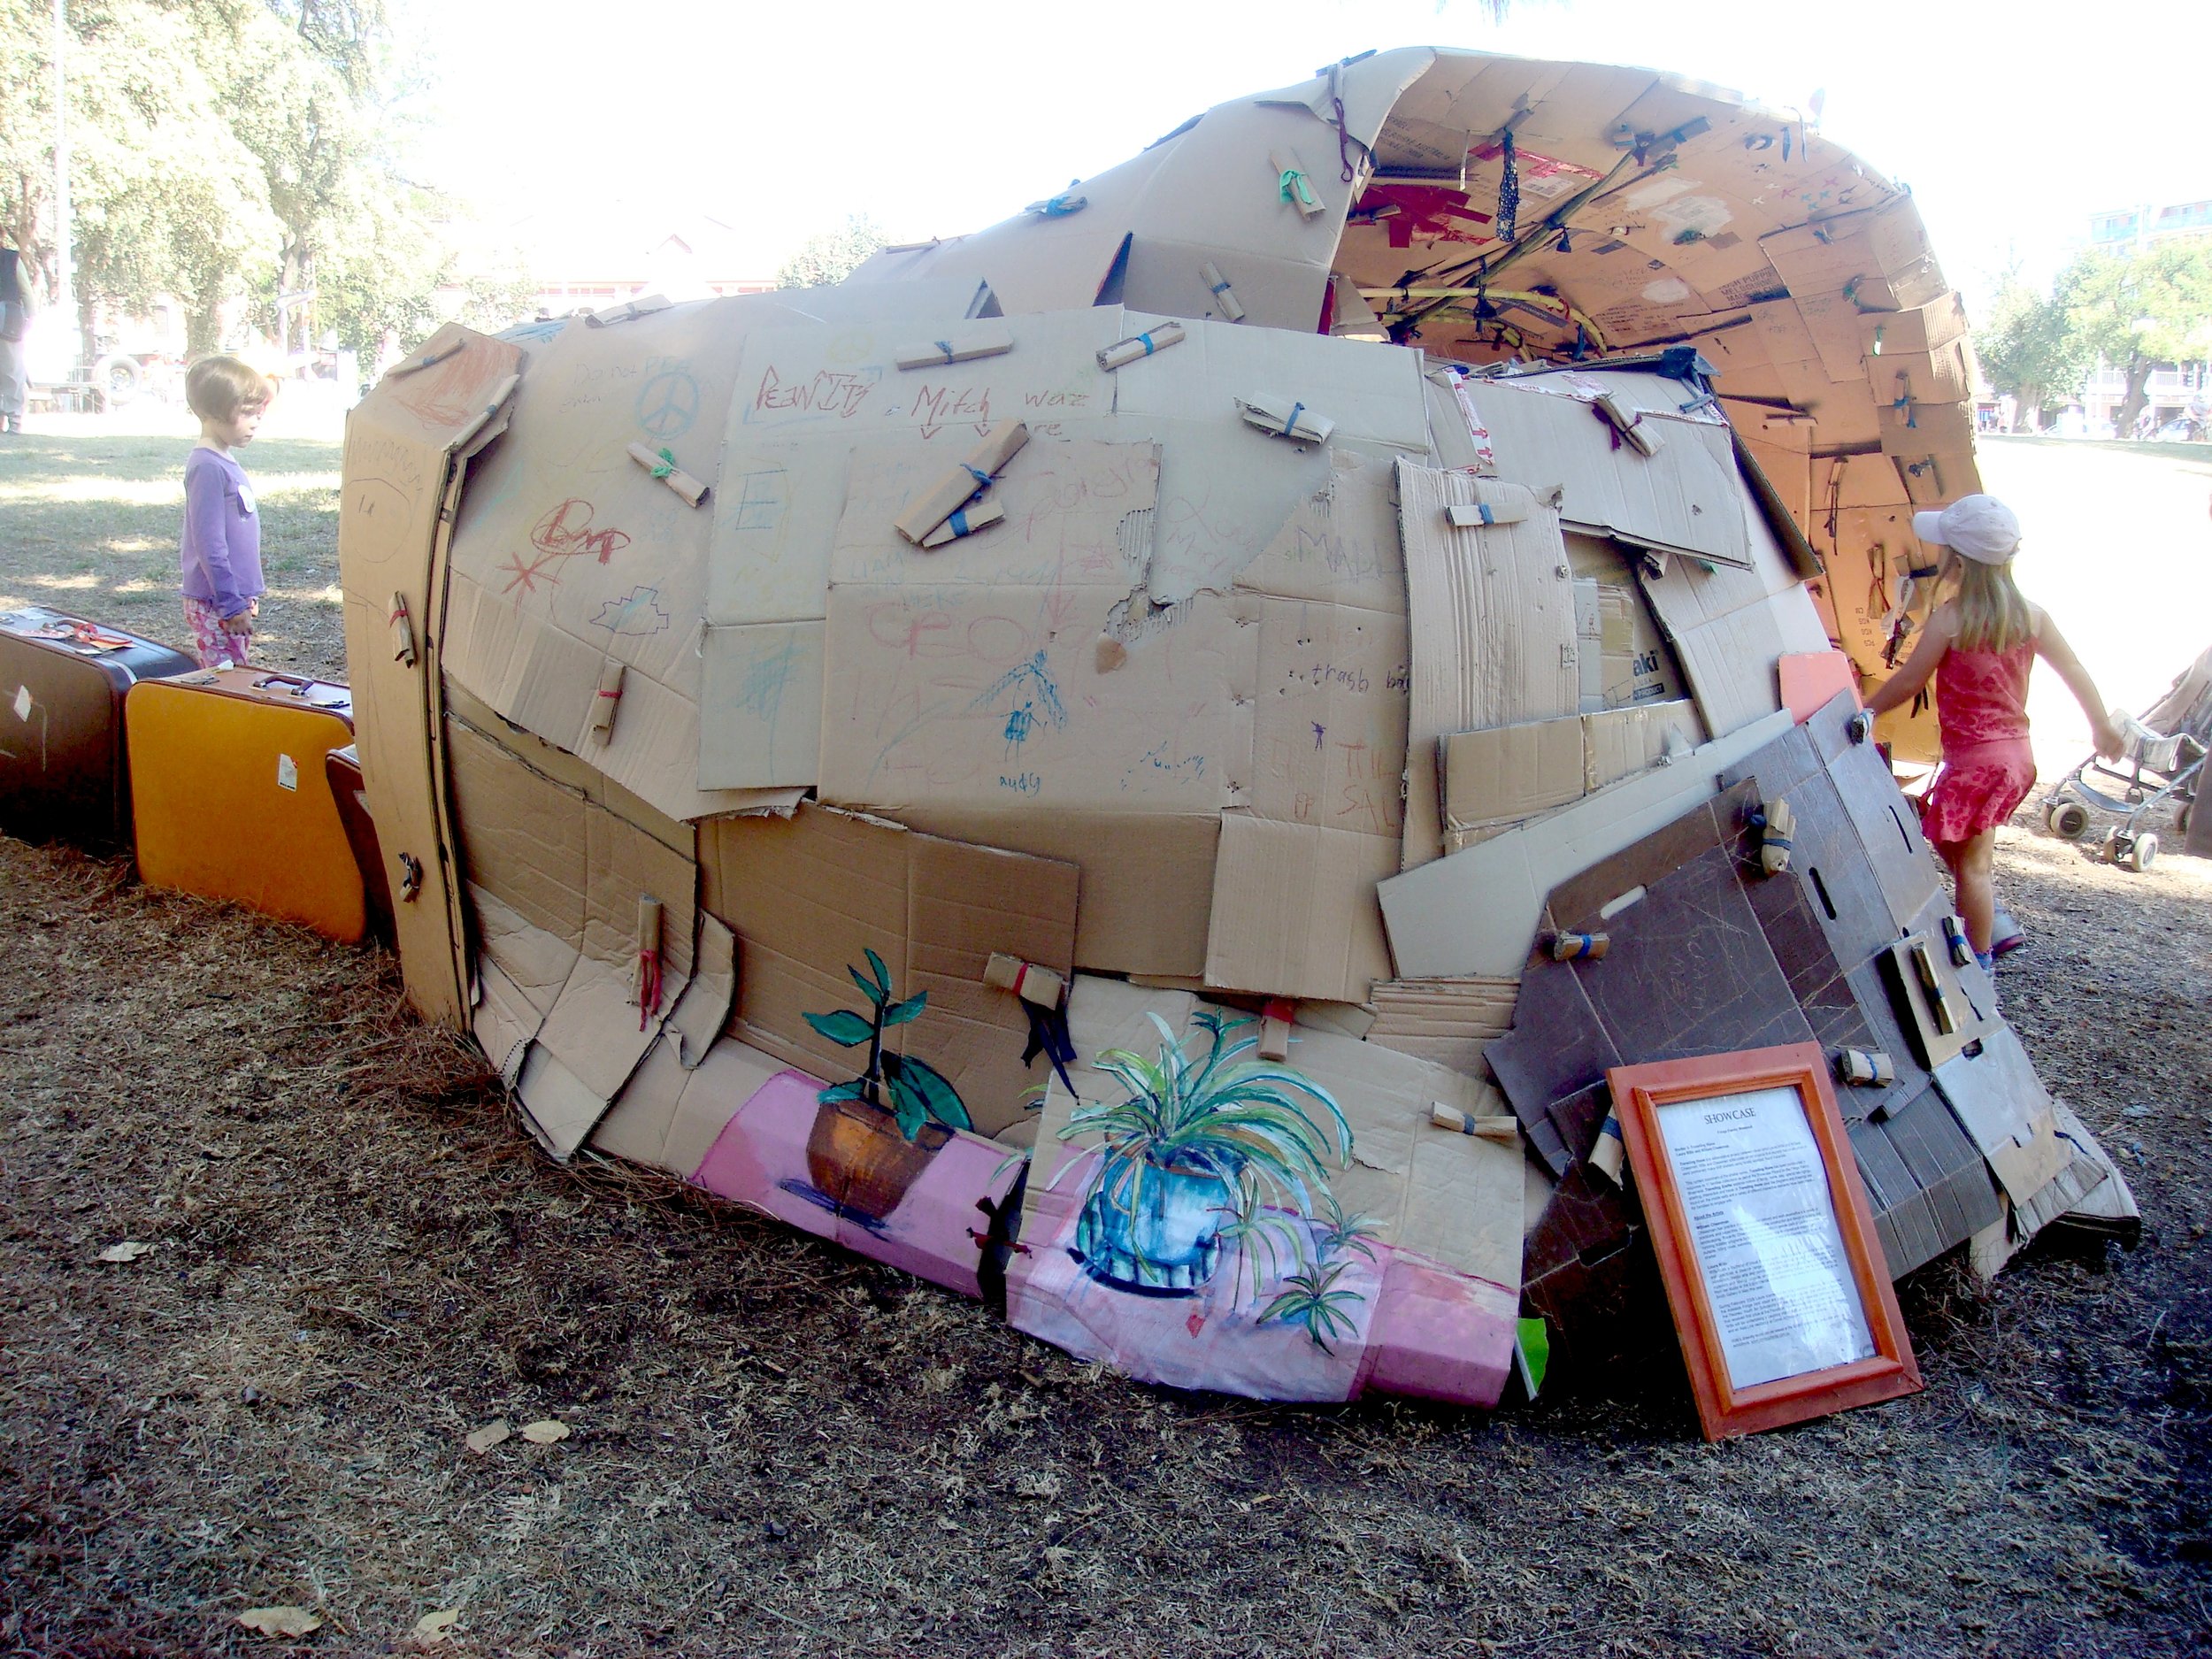   Shelter #3,    Travelling Home   ,  2008 Rhymil Park, Commissioned for Fringe Family Weekend, Cardboard, material, pencils, books, suitcases, cane 